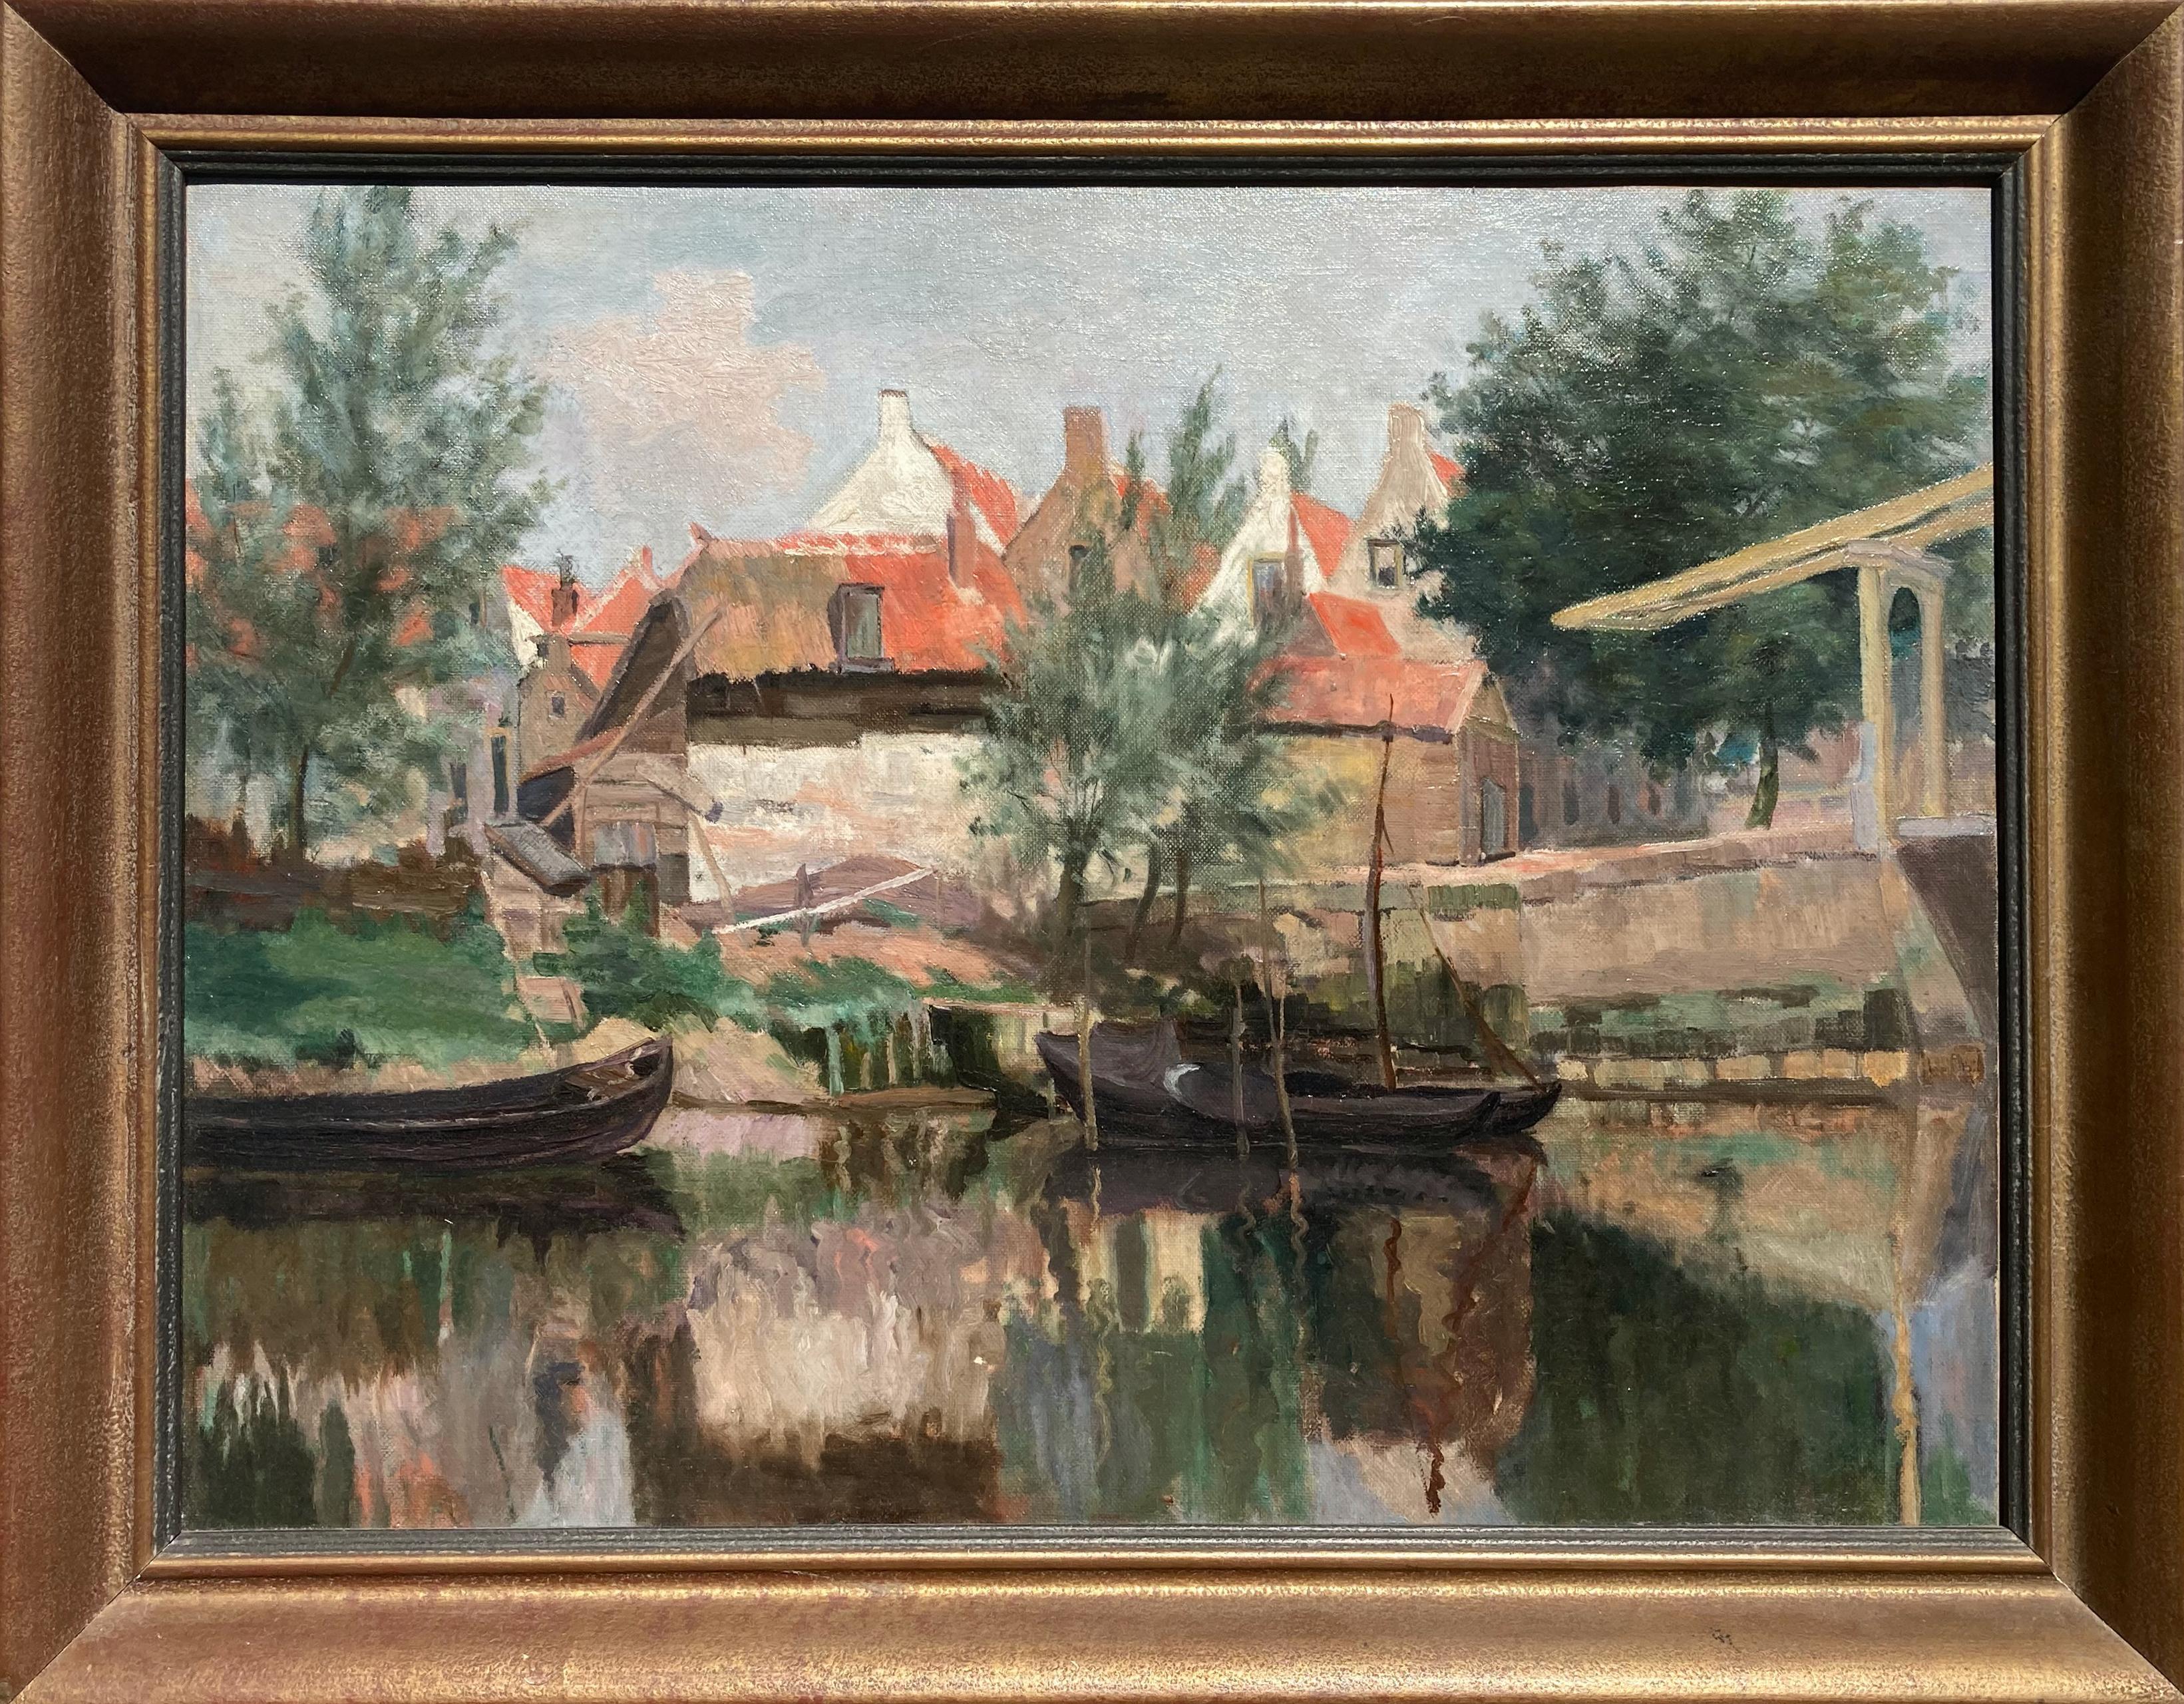 I liked this painting so much when I acquired it that I sent it to a high-end art restorer to work on a small area where the paint was getting crackly (you probably wouldn't be able to find it if you tried). Just masterful Impressionistic strokes,